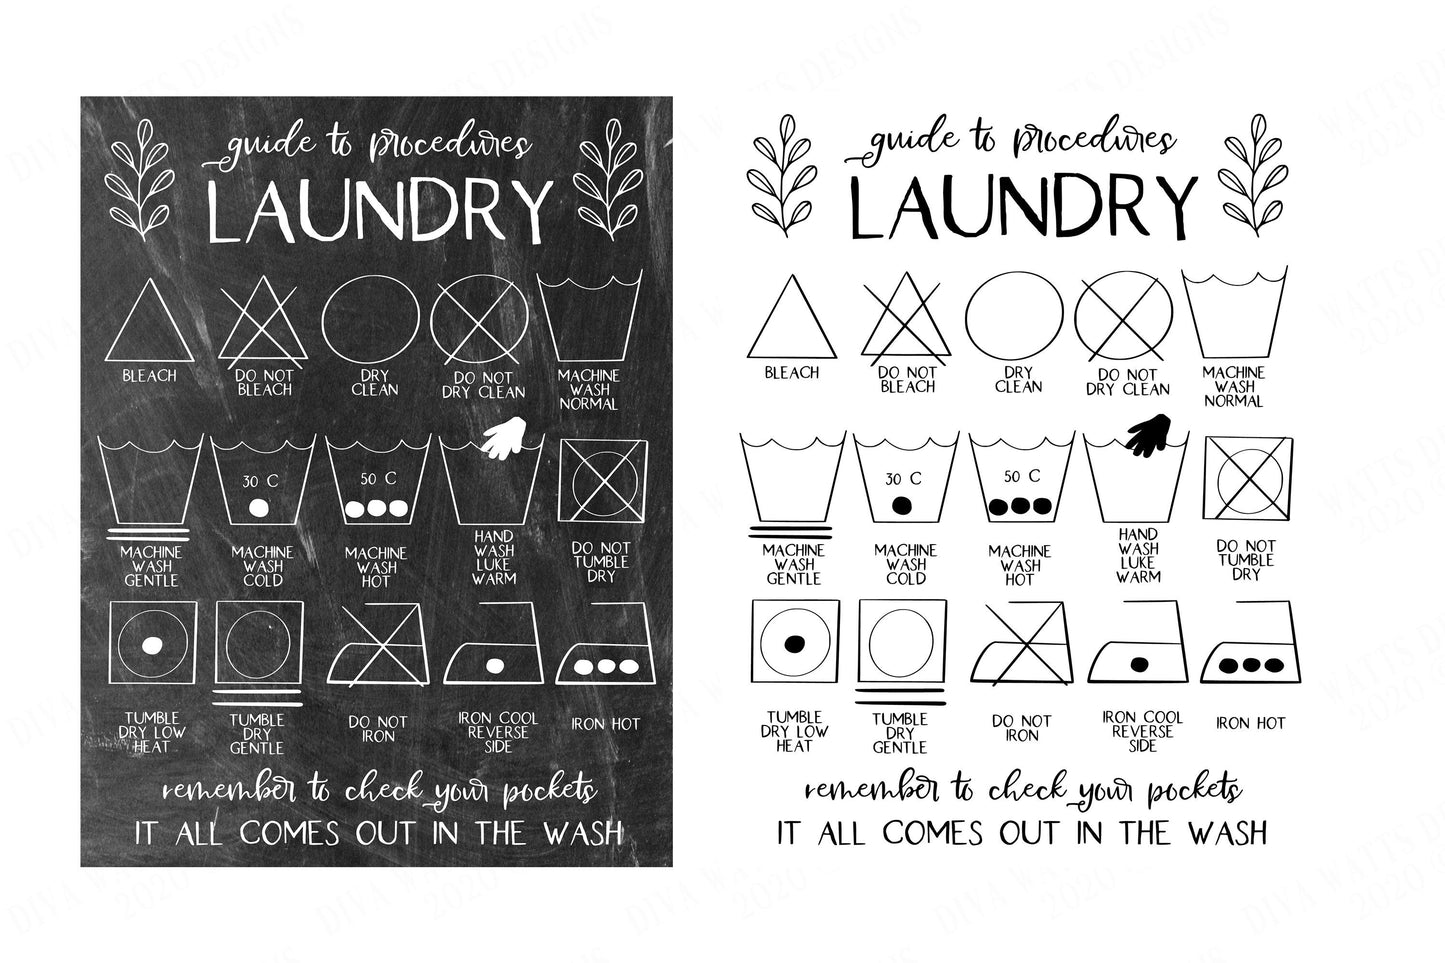 Laundry Procedures | Farmhouse Rustic Style Sign for Laundry Room | Cut Files and Printables | SVG DXF pdf jpg and more!